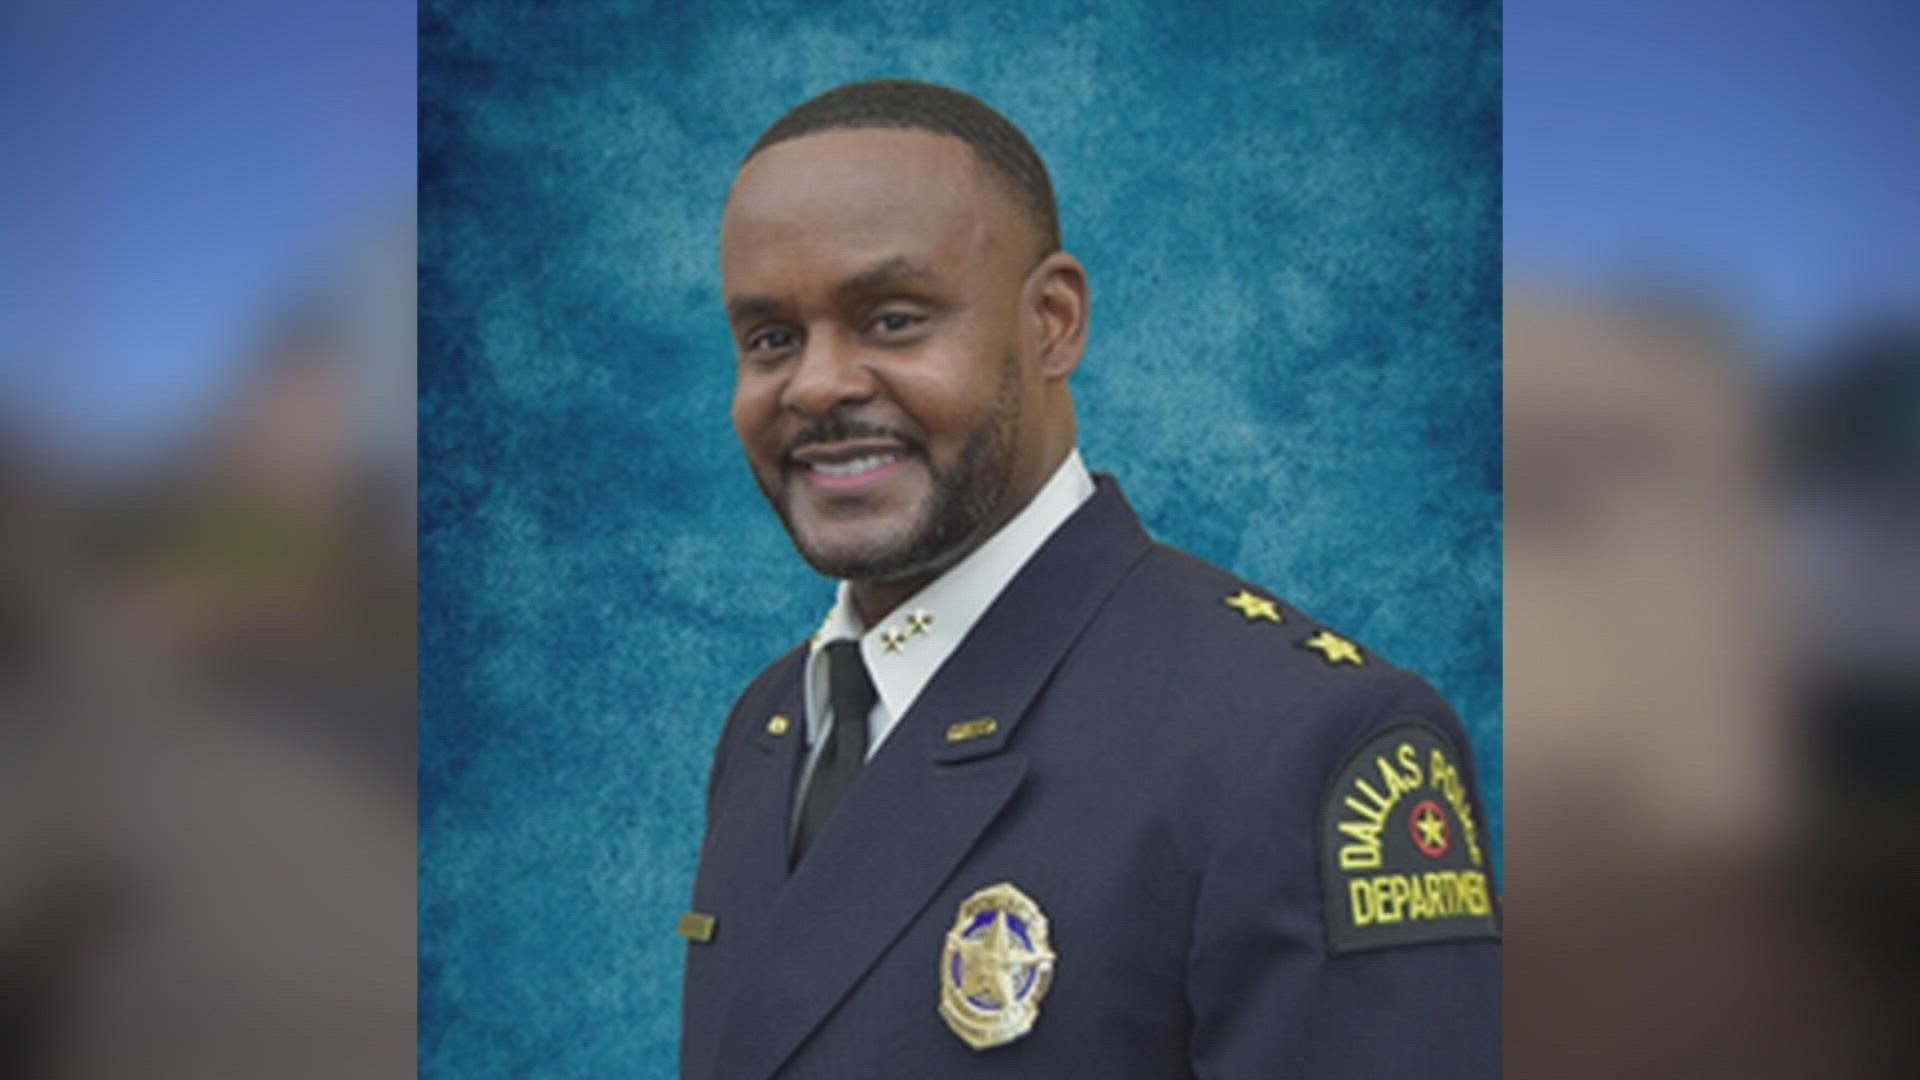 Avery Moore is currently the assistant chief for the Investigations Bureau of the Dallas Police Department.